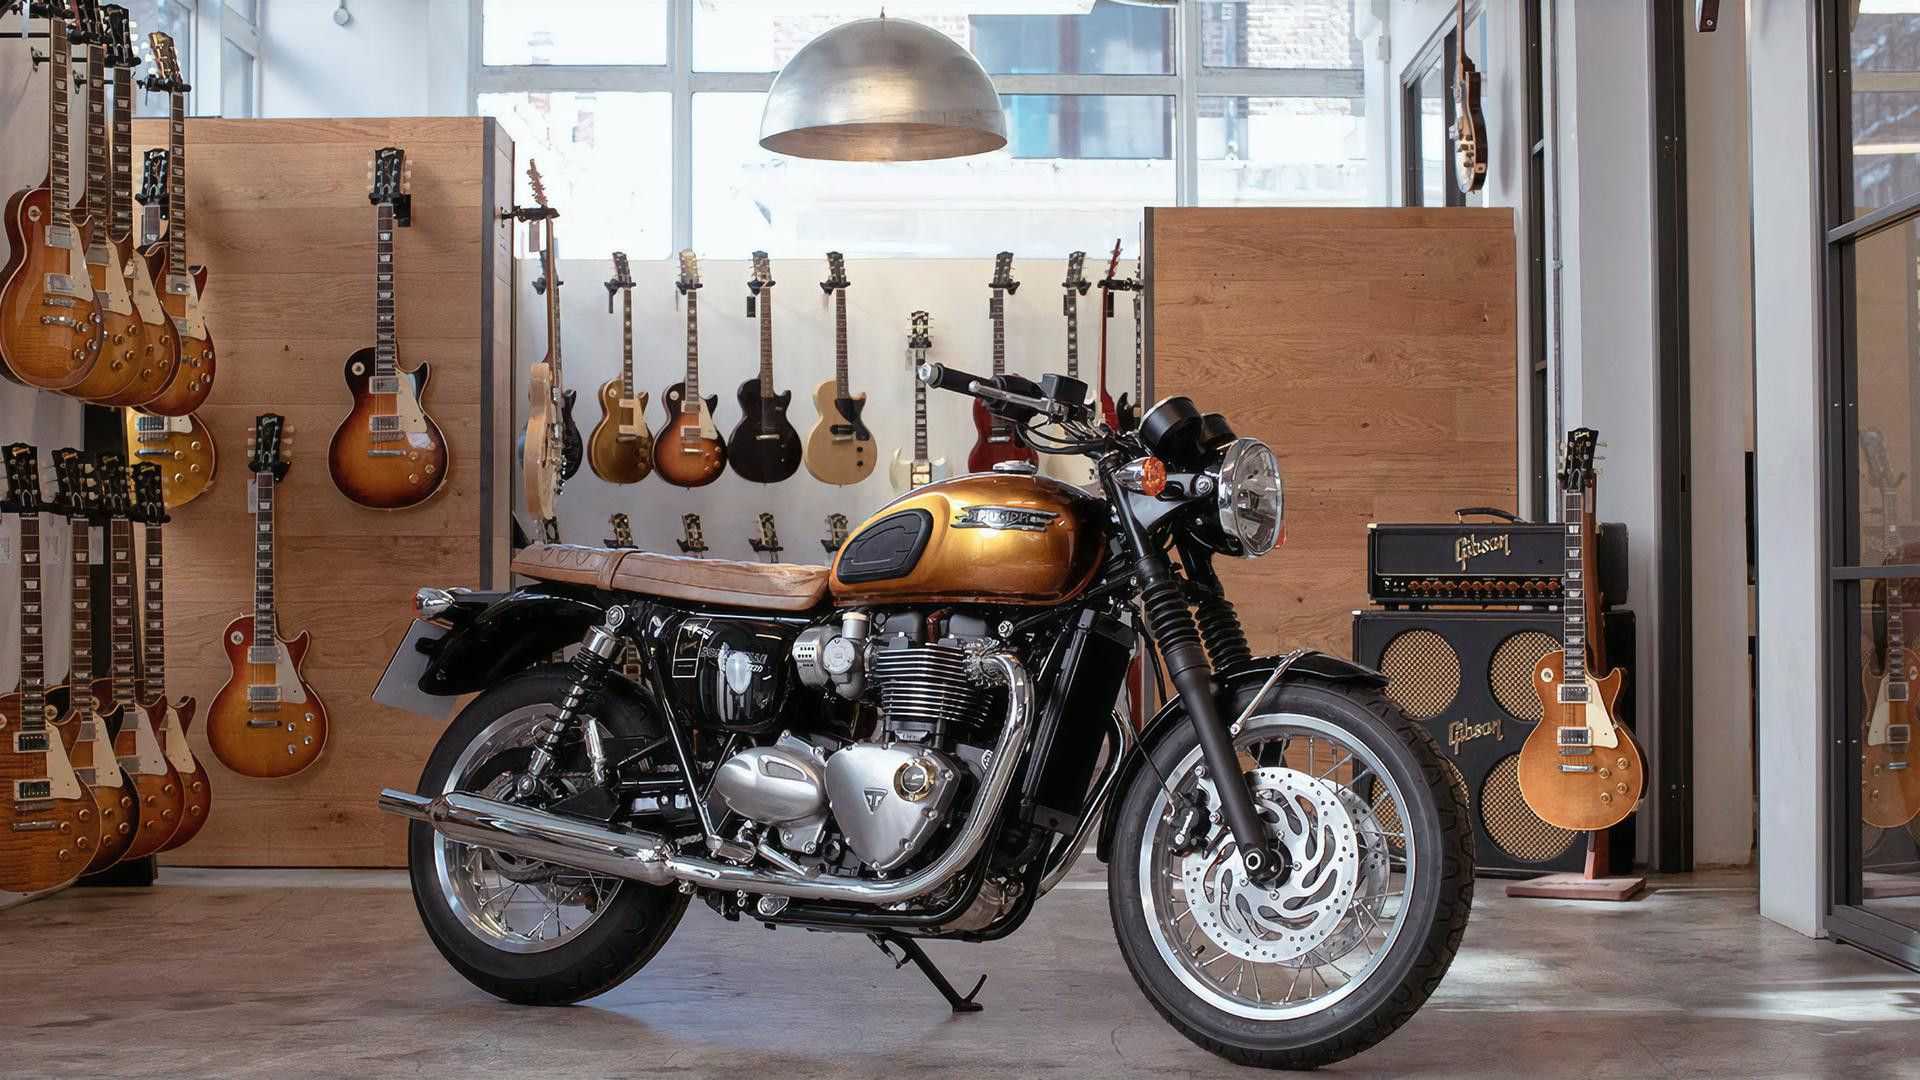 Following Yamaha's launch of the XSR900 2022, it pushes cutting-edge technology with a classic twist in the land of the 80's. Japanese hardware brand Y's Gear has created a perfect crafting project in the style. 70's  Yamaha embeds a sense of artistry into the bike. Just as Triumph Gibson has brought a Gibson pattern to the body, Y's Gear has put a Yamaha guitar in the XSR900 that stands out with the paint on the body. The bike is accented with black tones, the XSR900 and Yamaha logos in bronze and gold.  Dark brown leather seats contrast with light brown on the sides add a classic look. Ohlins suspension, new exhaust, not sure what it is. custom license plate holder New LED turn signal lights  This whole set is available for purchase. But sold only in Japan, it is priced at 198,000 yen or around 54,000 baht and is applicable to the XSR900 model year 2016-2021 only.